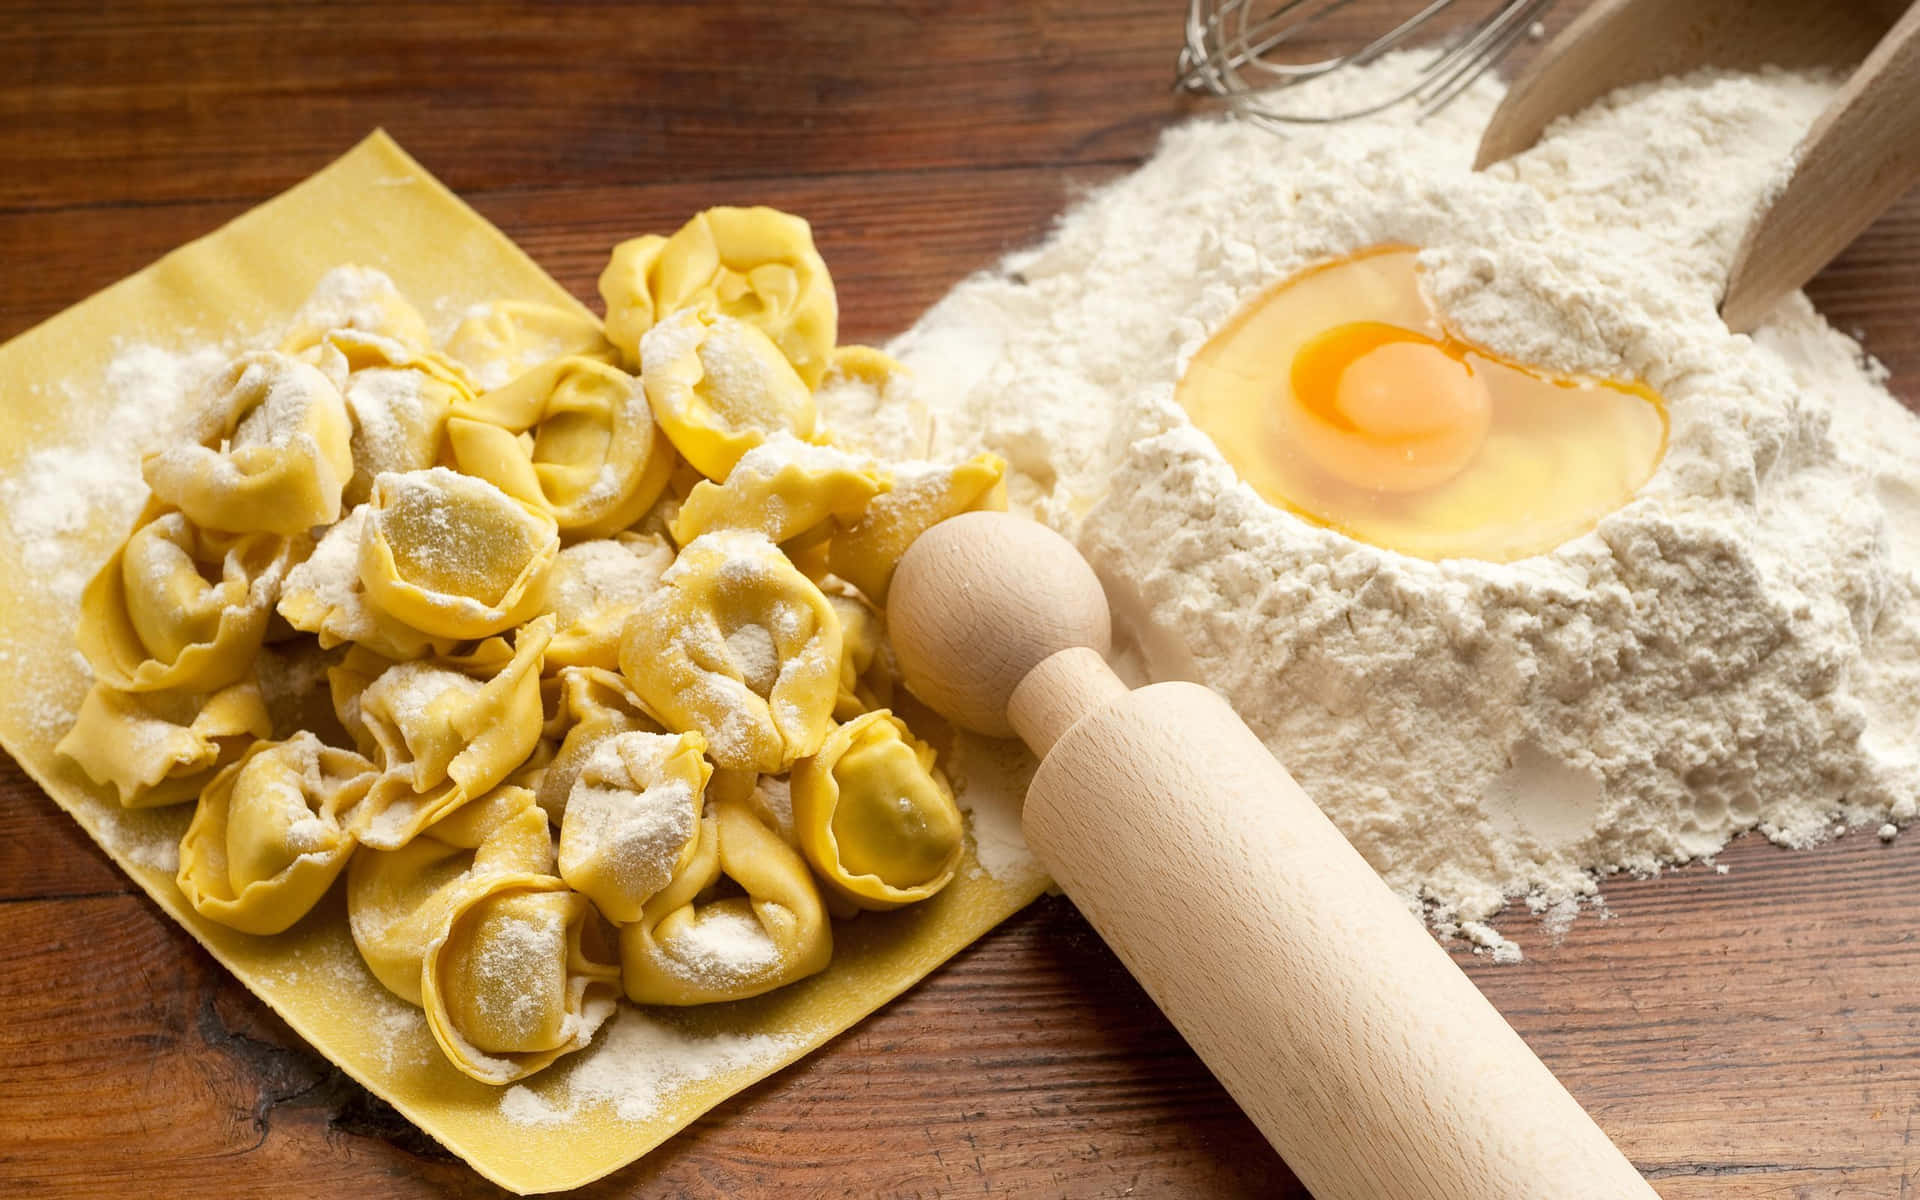 A Wooden Table With Pasta And Eggs